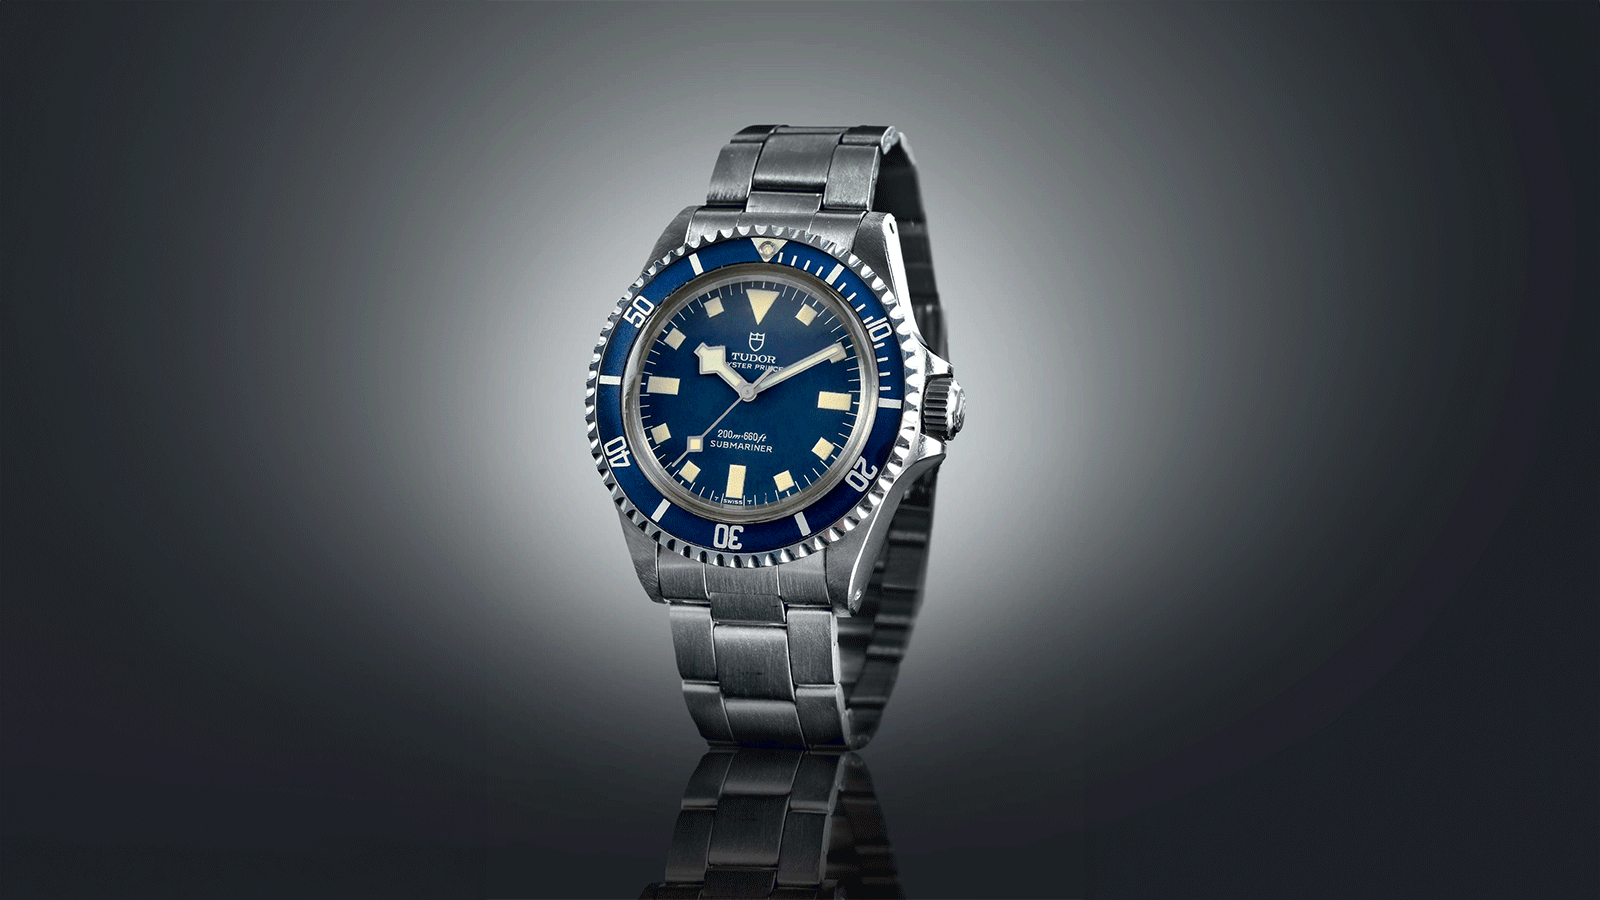 In the mid-1970s, reference 7016 was replaced by reference 9401/0, which welcomed a higher-performance movement with the ETA Calibre 2776, notably allowing more precise time-setting thanks to a stop-seconds function.